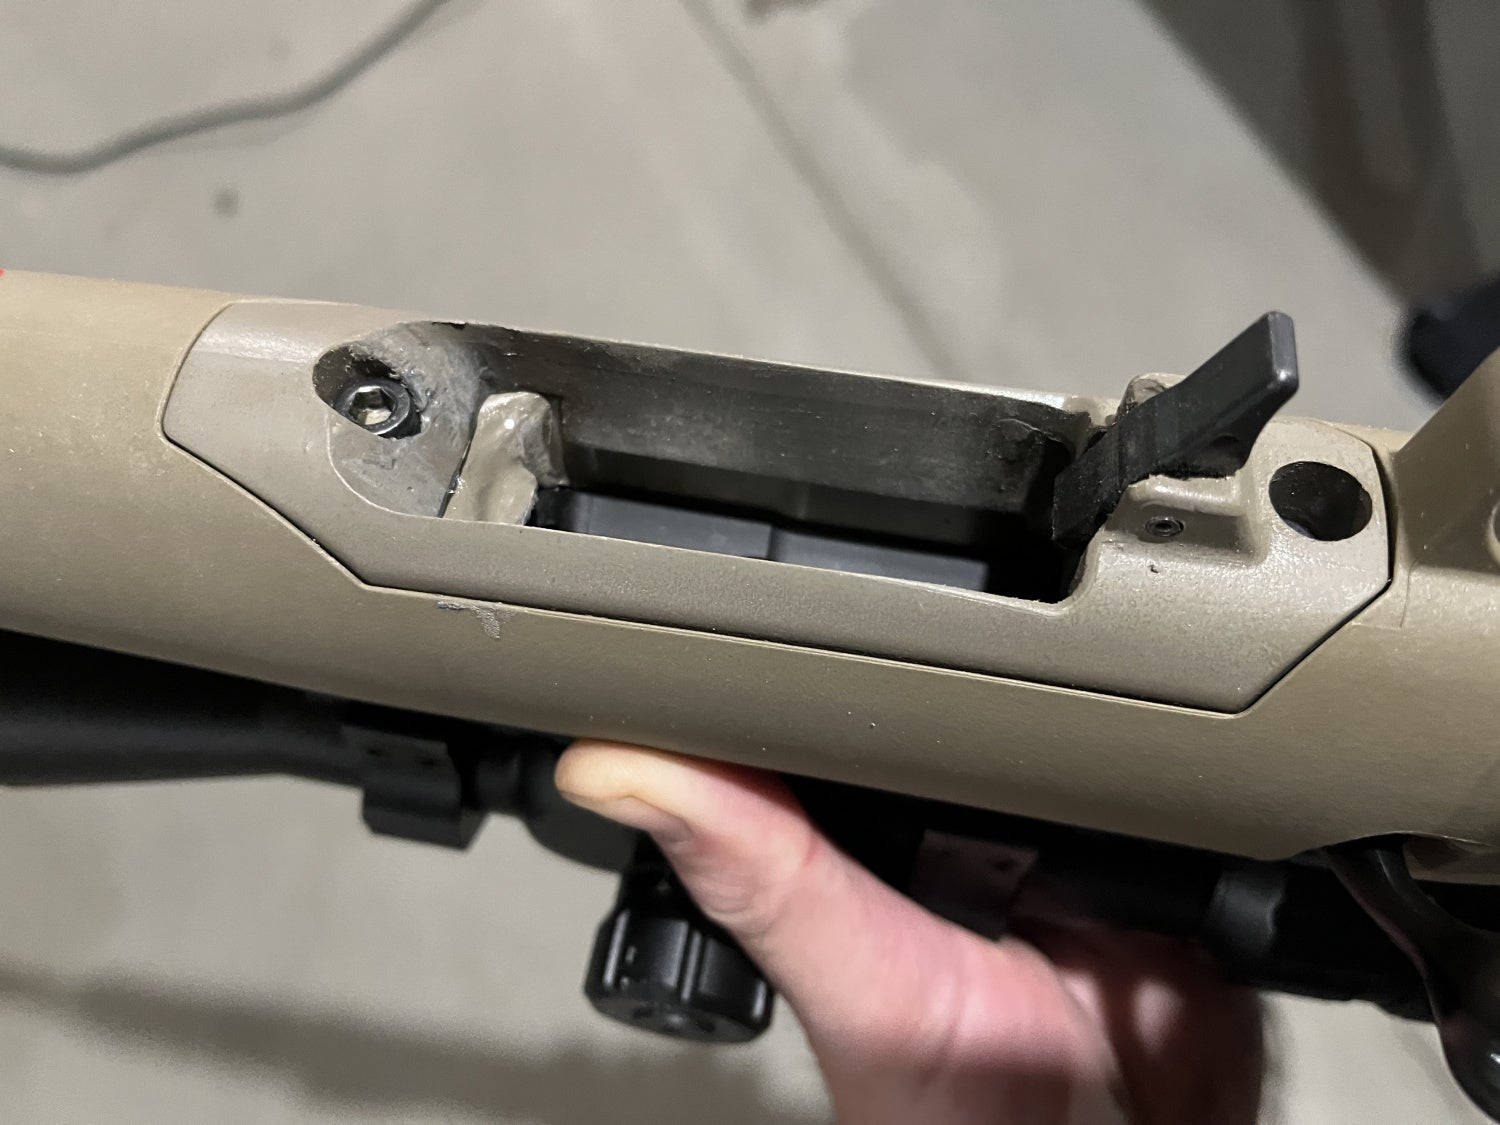 Converting Ruger American Ranch rifles to accept AK Magazines